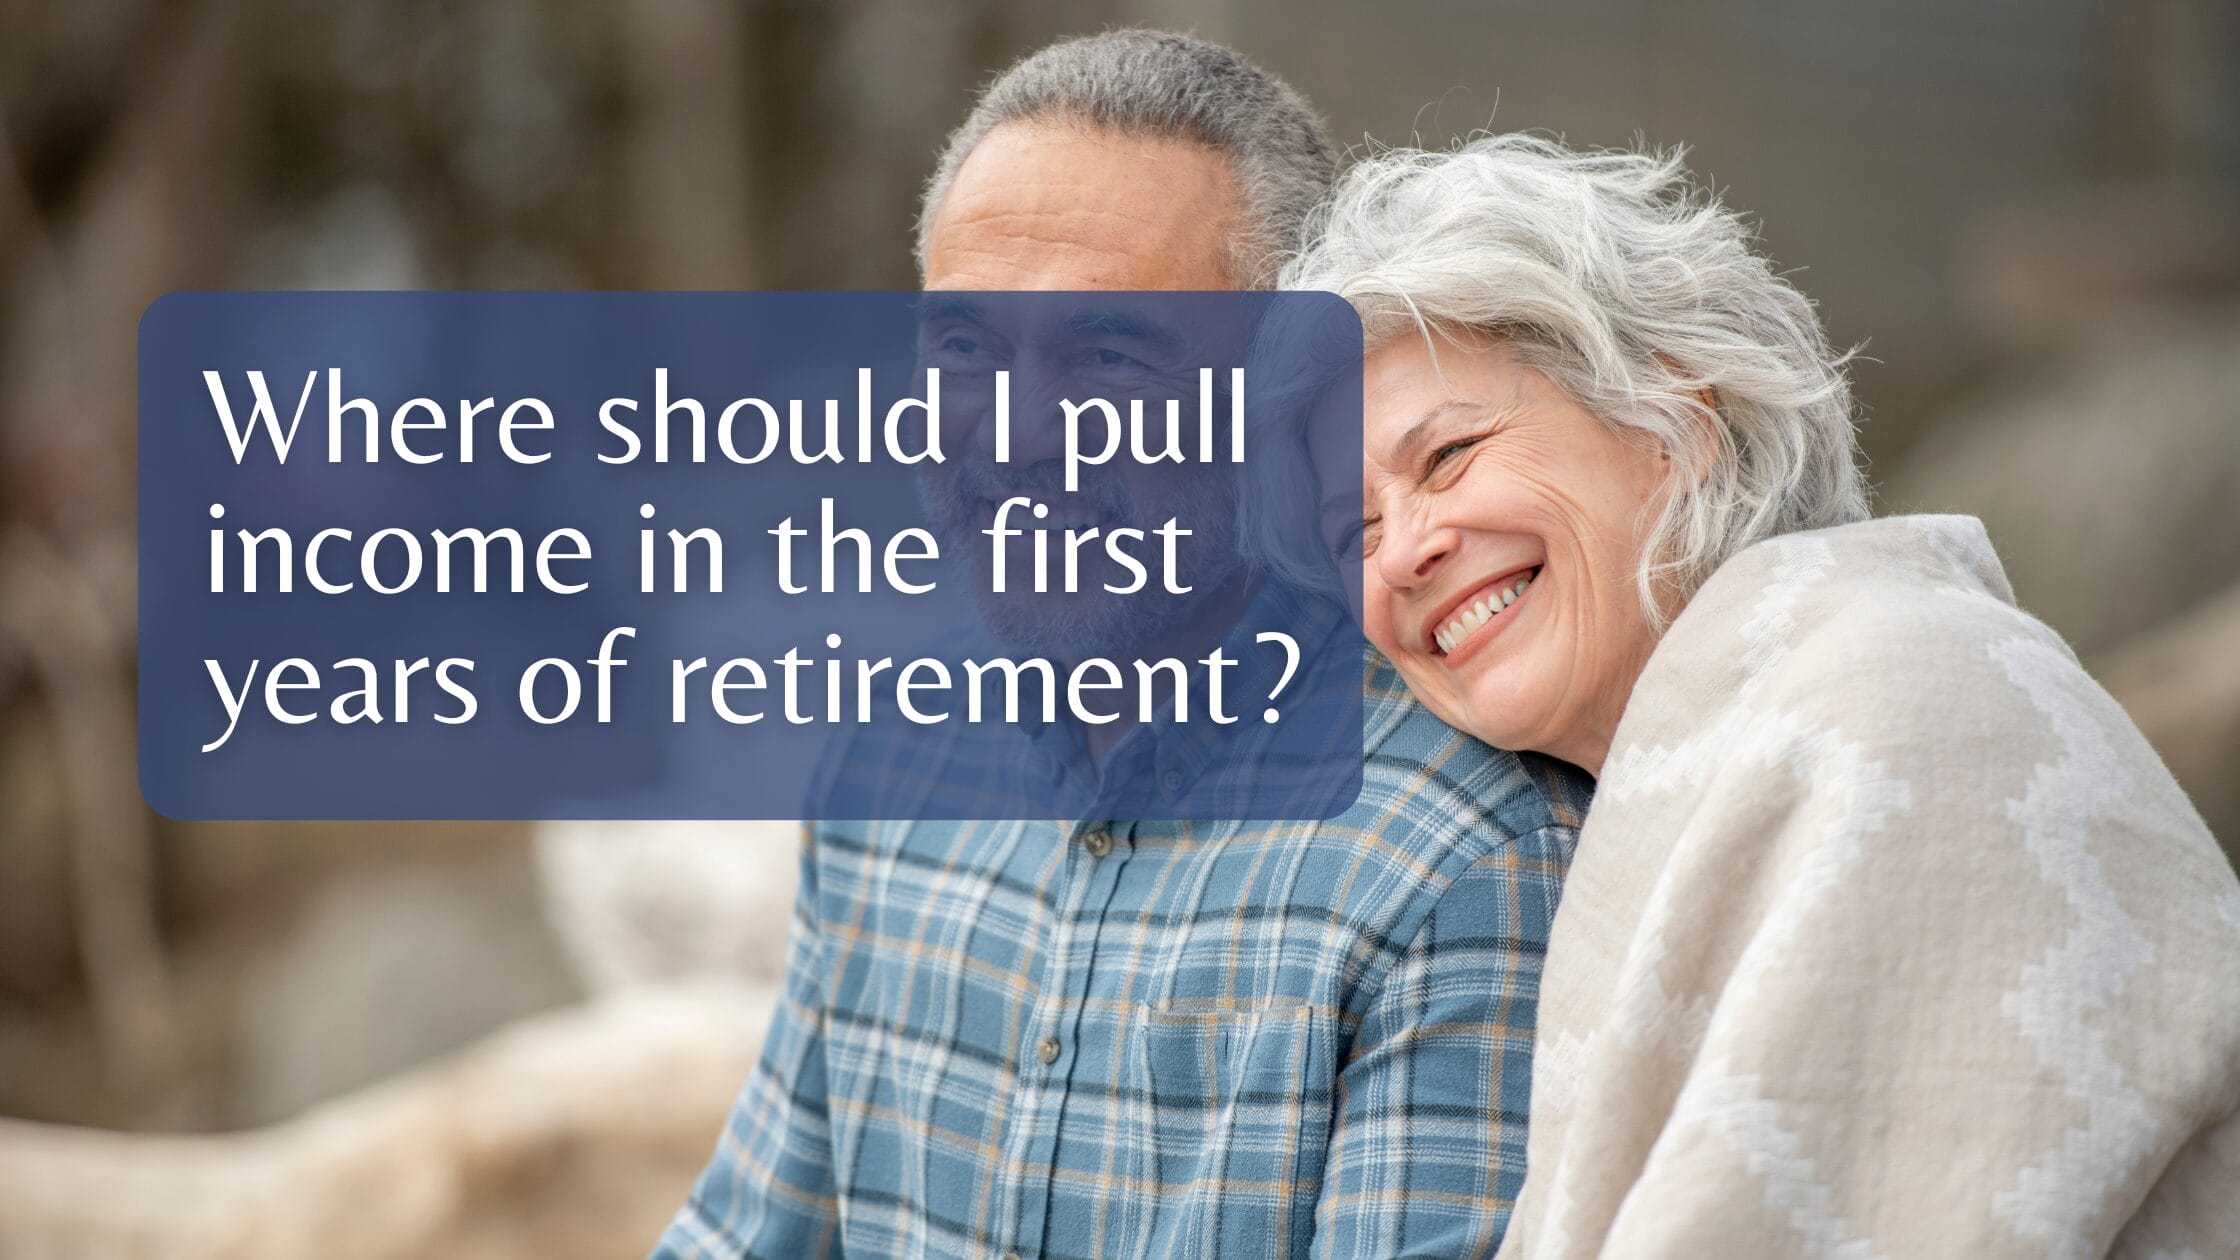 Where should I pull income in the first years of retirement?